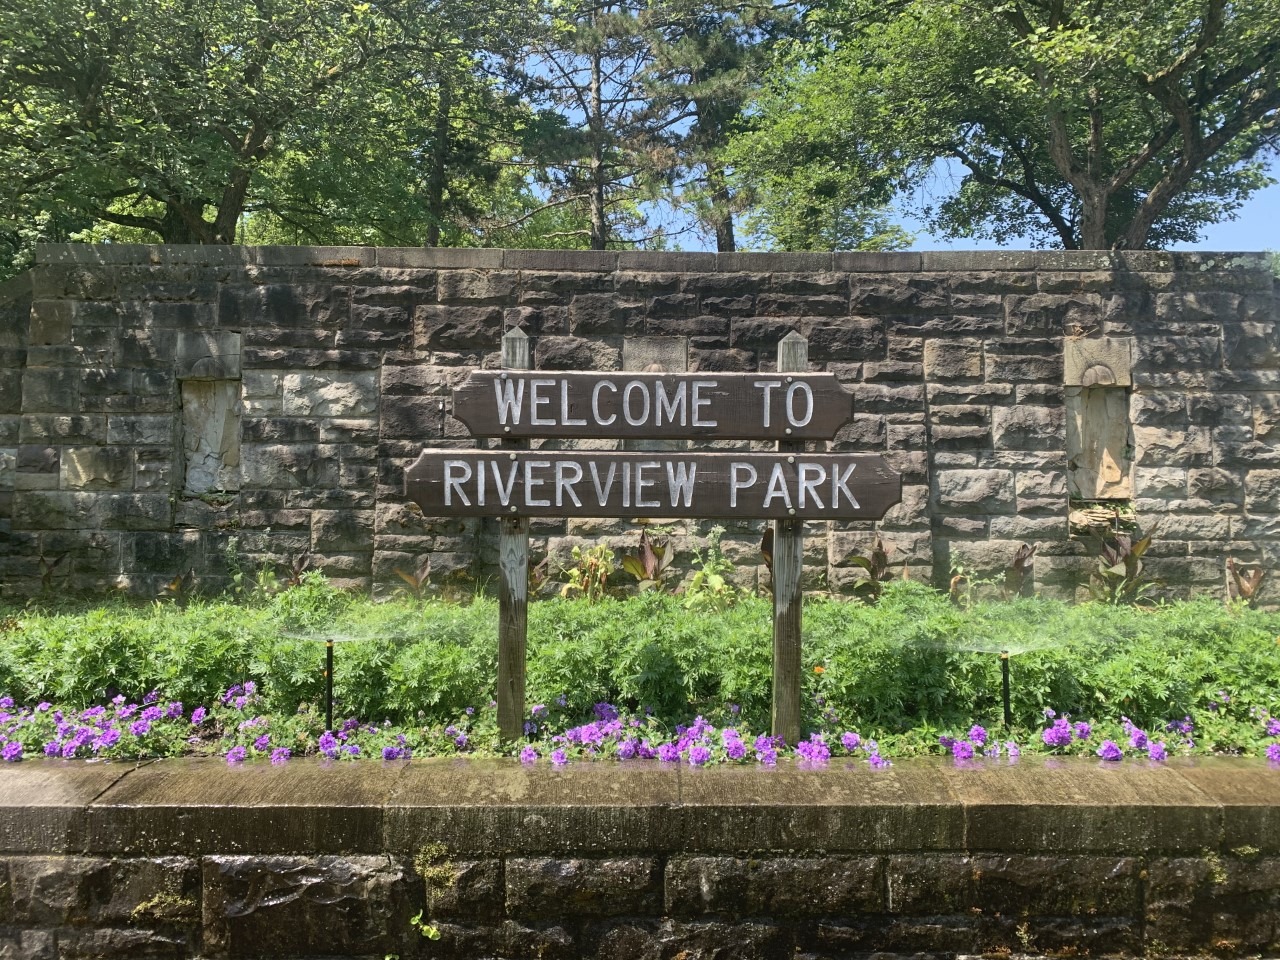 Welcome to Riverview Park sign